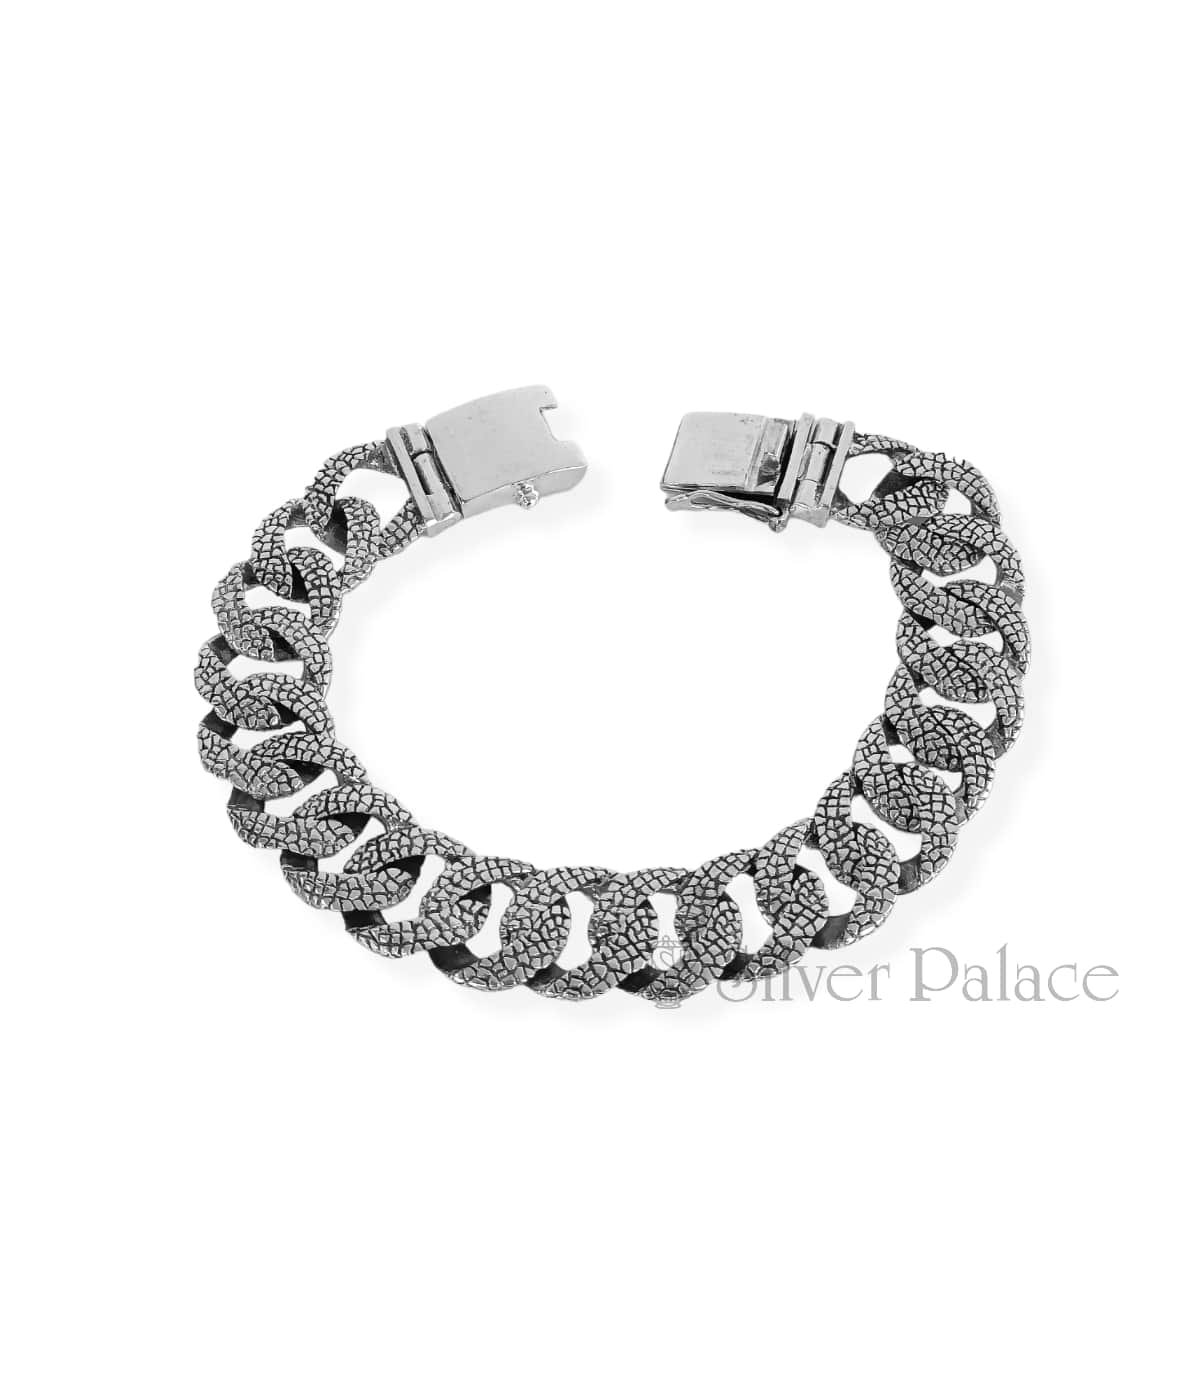 OXIDISED SILVER LOOP FISH SCALE DESIGN BRACELET FOR MEN WITH CLASP LOCKING